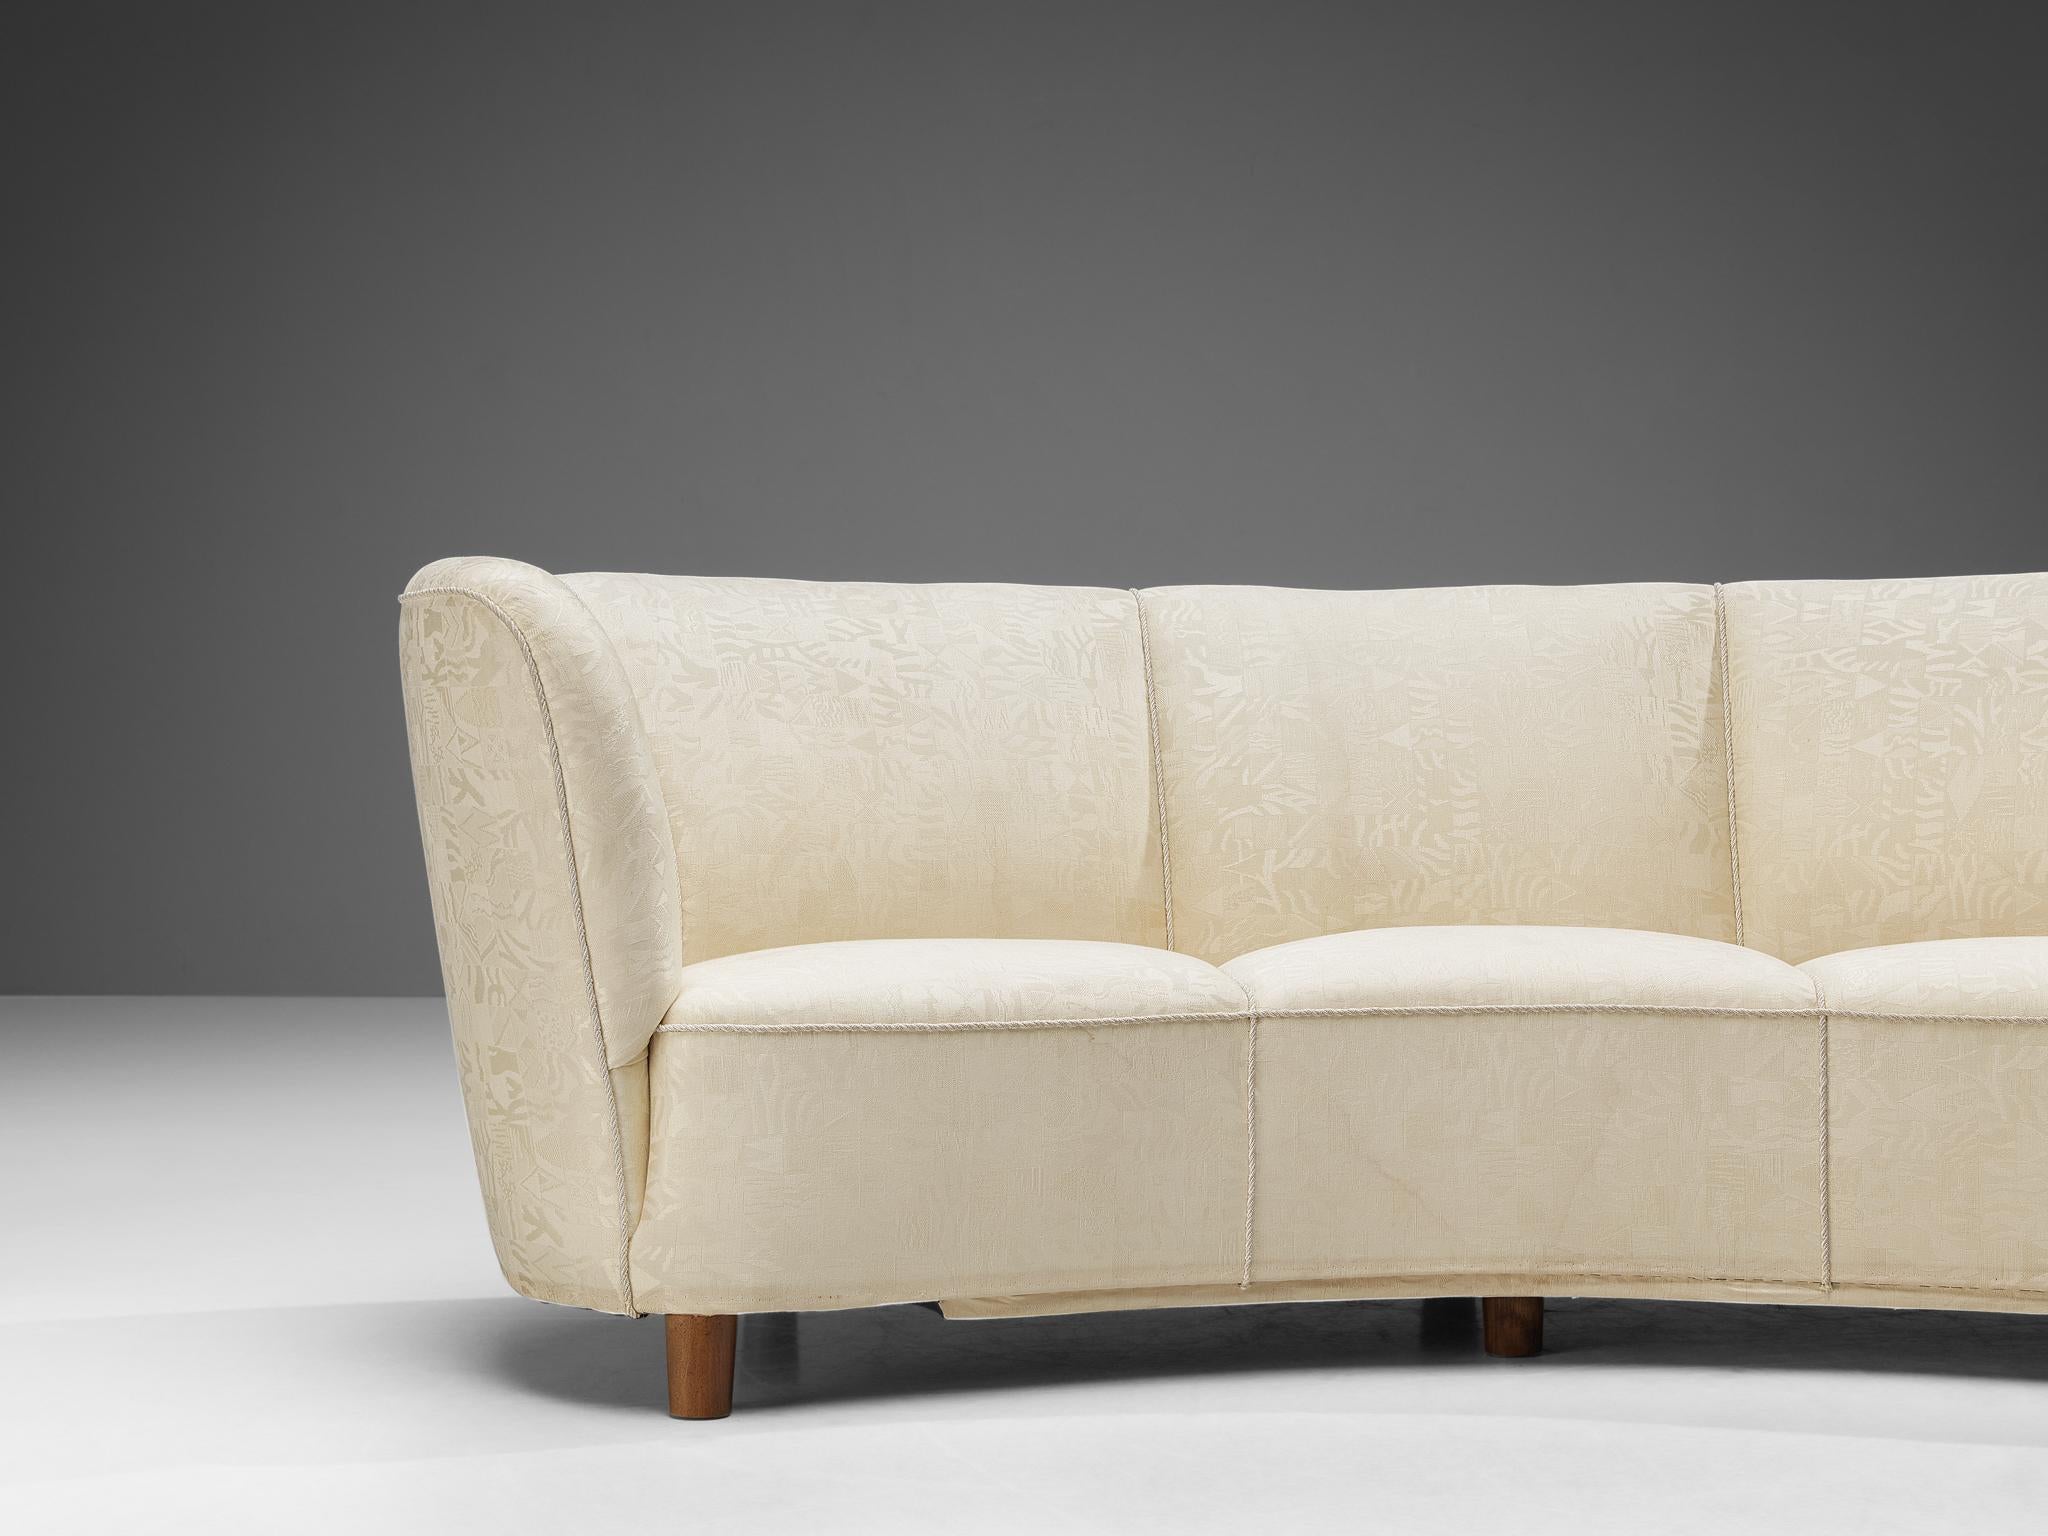 Mid-20th Century Danish Banana Sofa in Patterned Off White Upholstery  For Sale